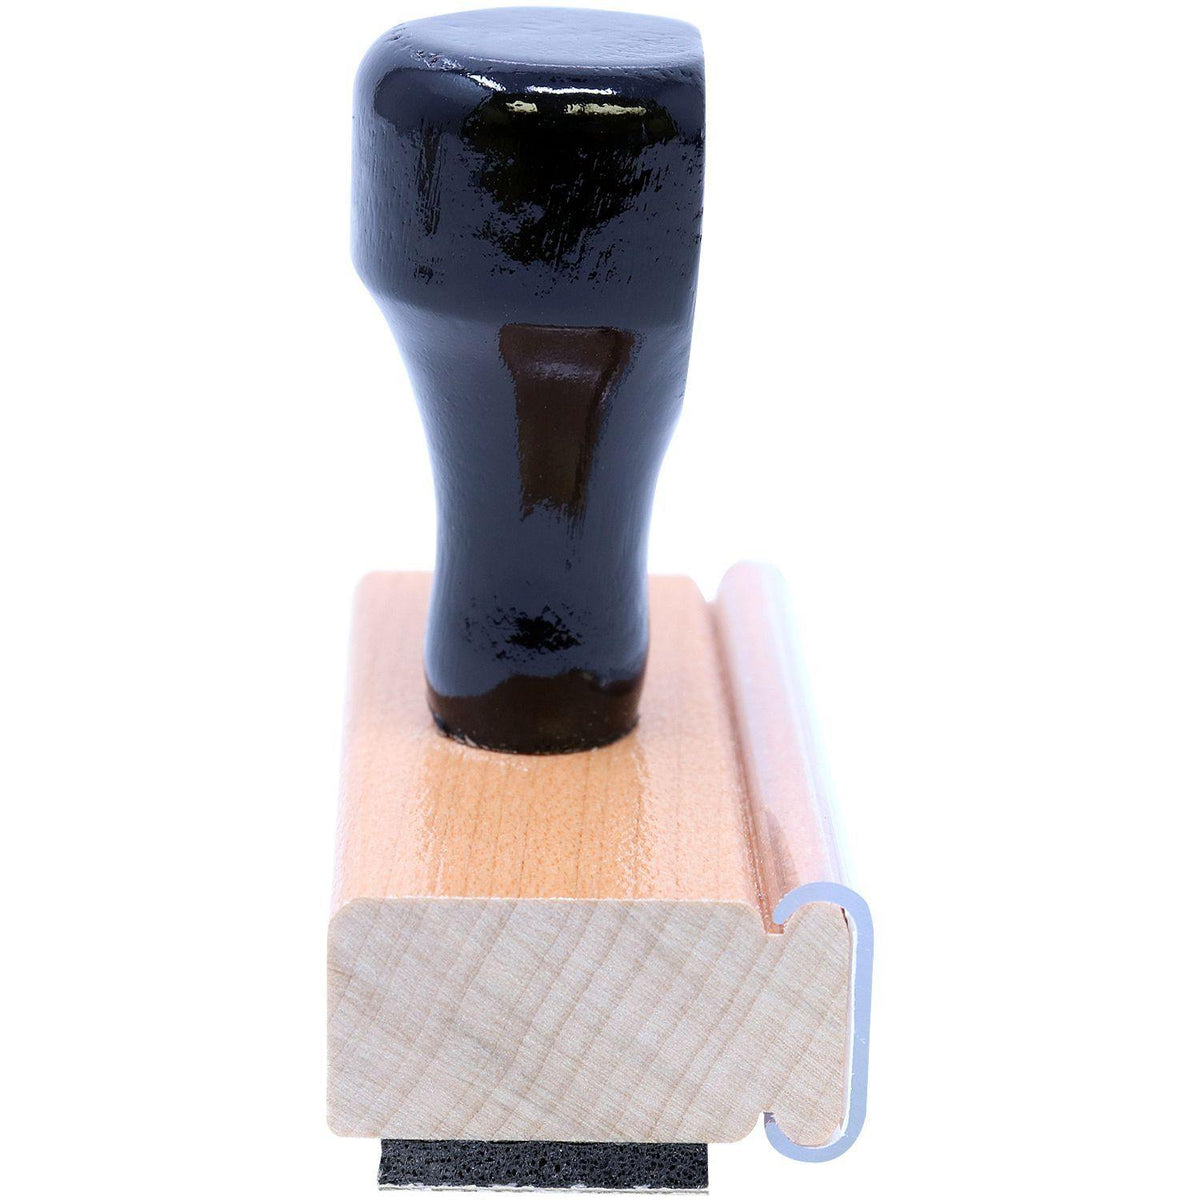 School Property Rubber Stamp - Engineer Seal Stamps - Brand_Acorn, Impression Size_Small, Stamp Type_Regular Stamp, Type of Use_Teacher